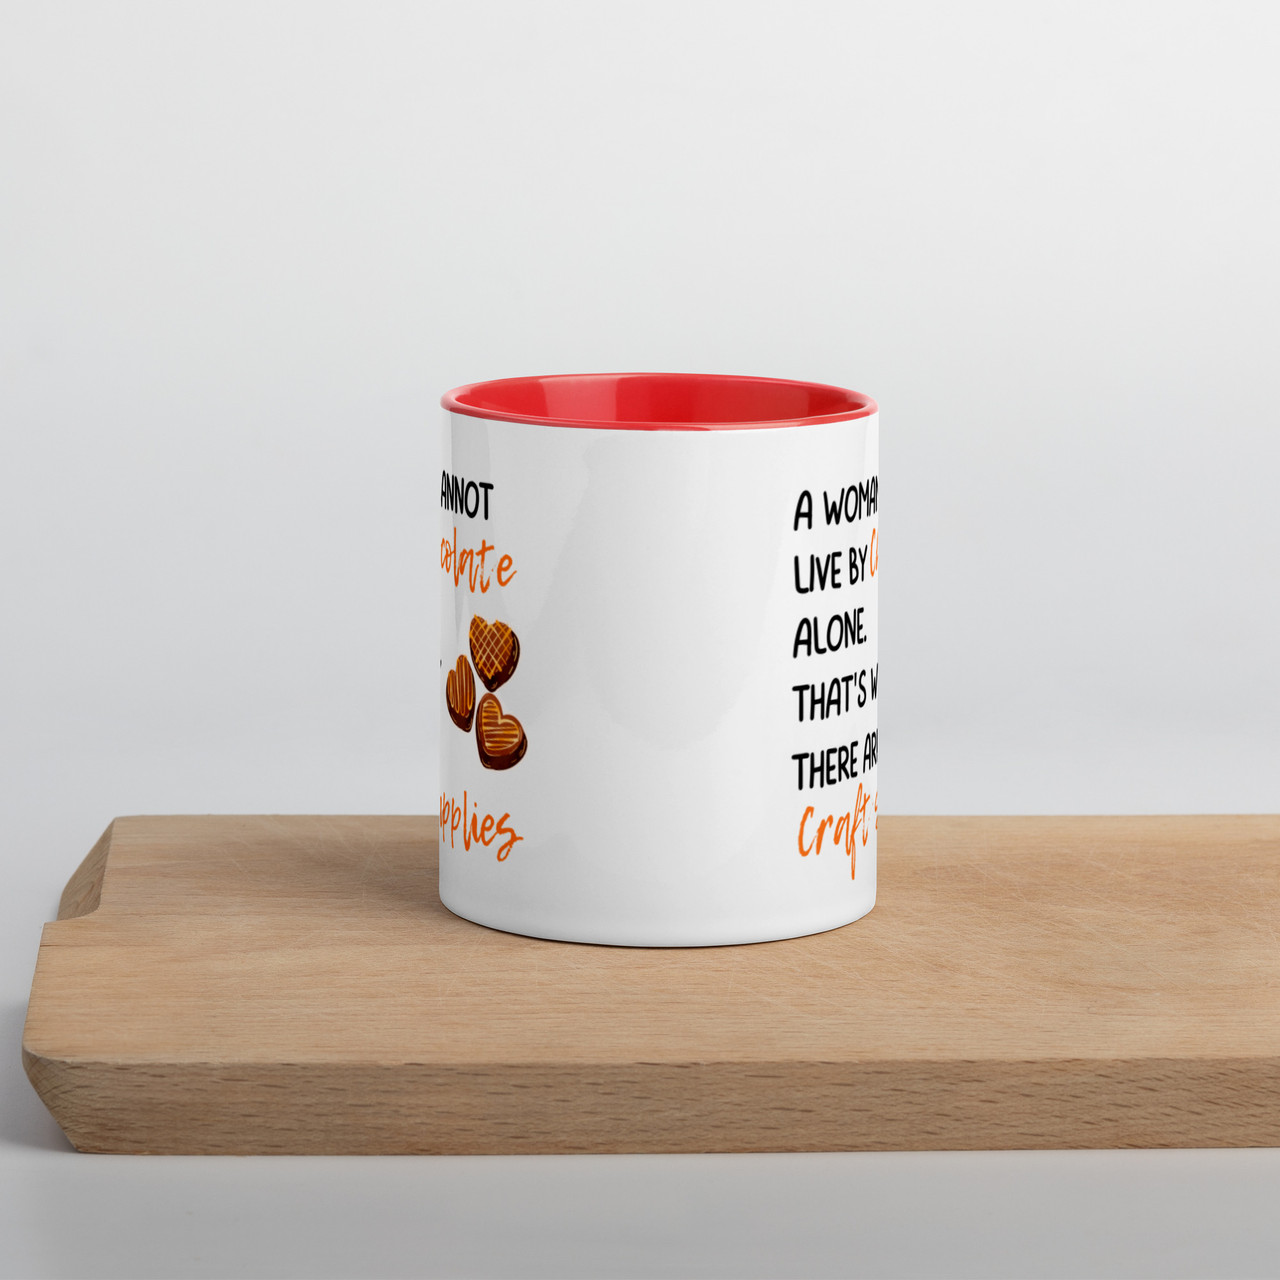 Cannot live by chocolate alone - Mug with Colour Inside